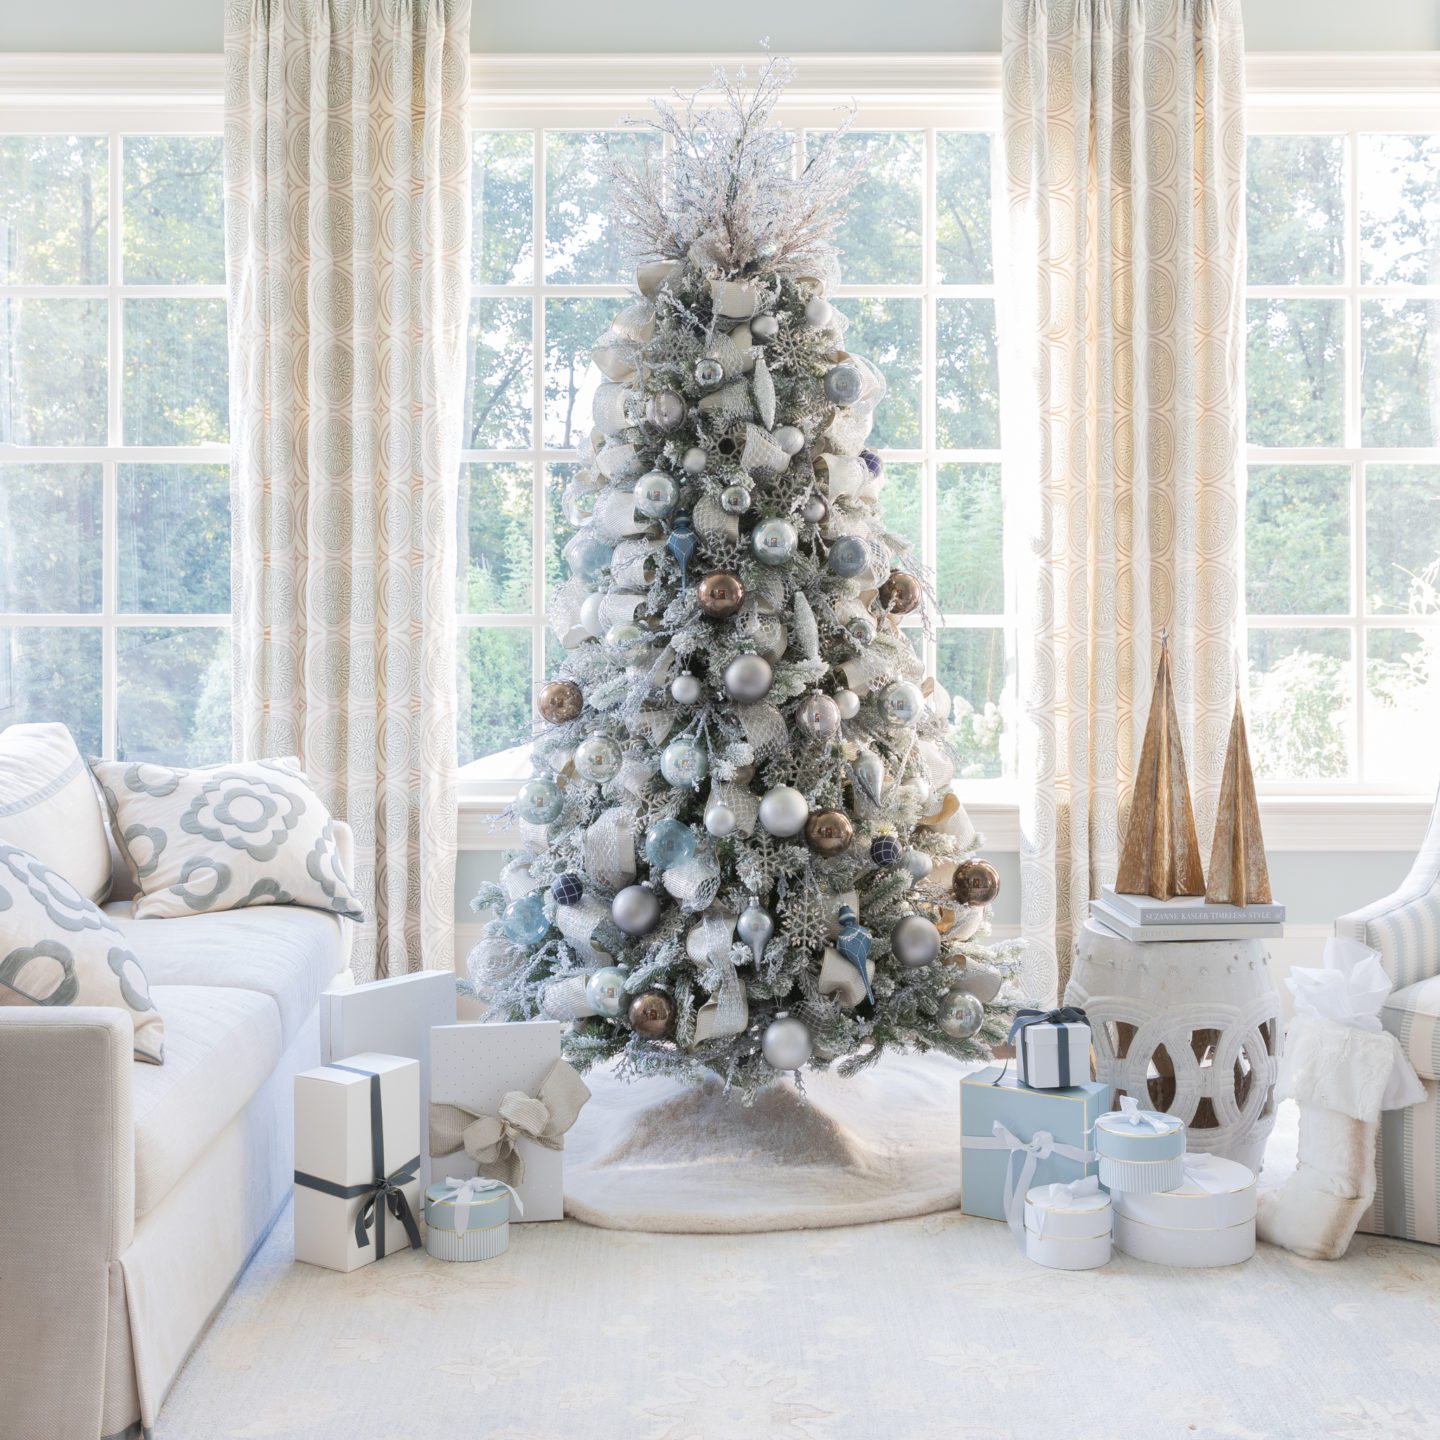 Flocked Christmas tree covered in blue, silver, brown, and gray ornaments and ribbon.